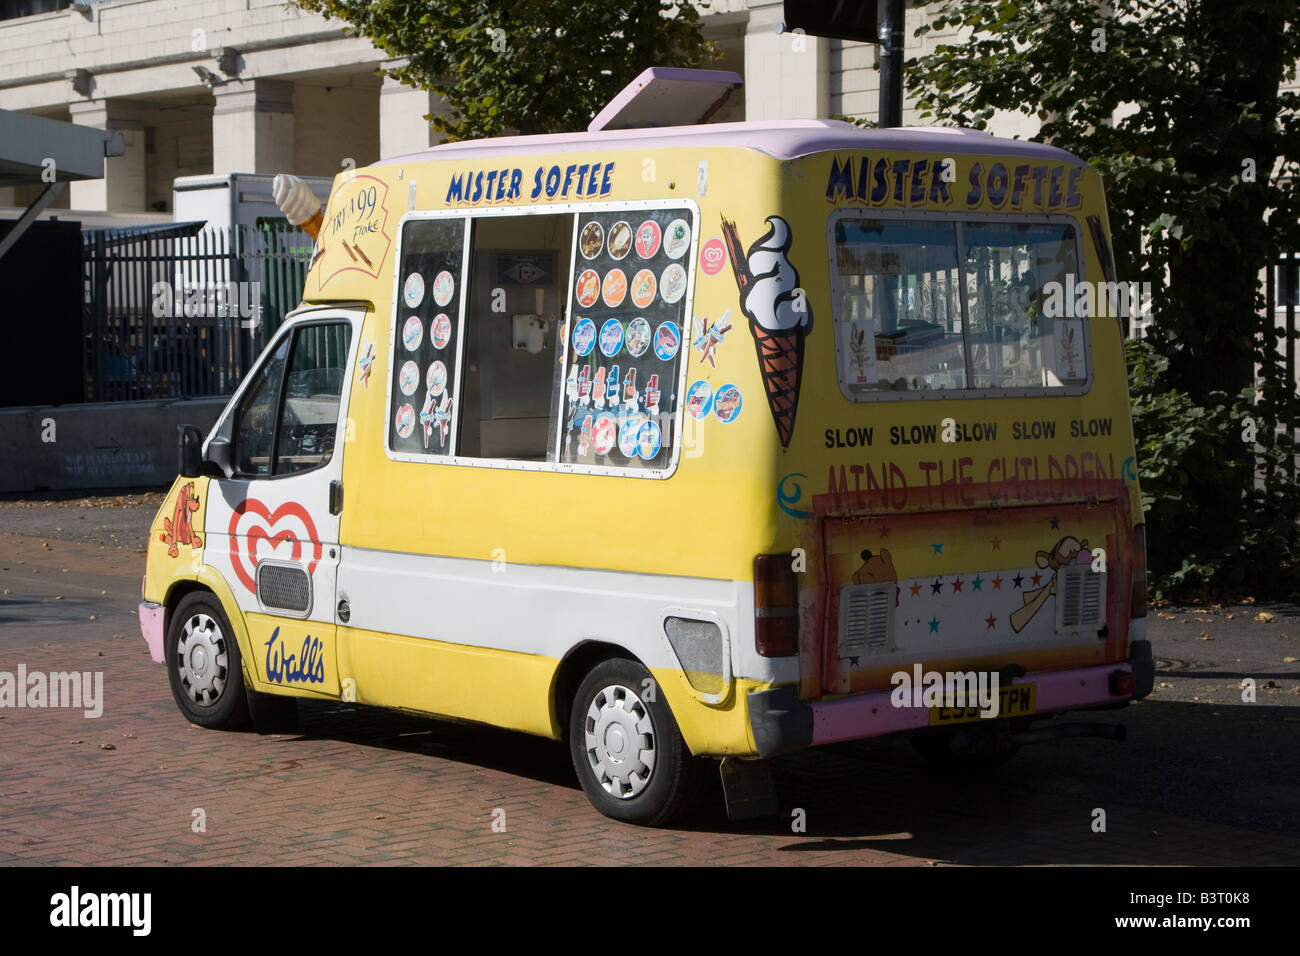 Mister softee mobile traditionnel ice cream van olympic way brent england uk go Banque D'Images